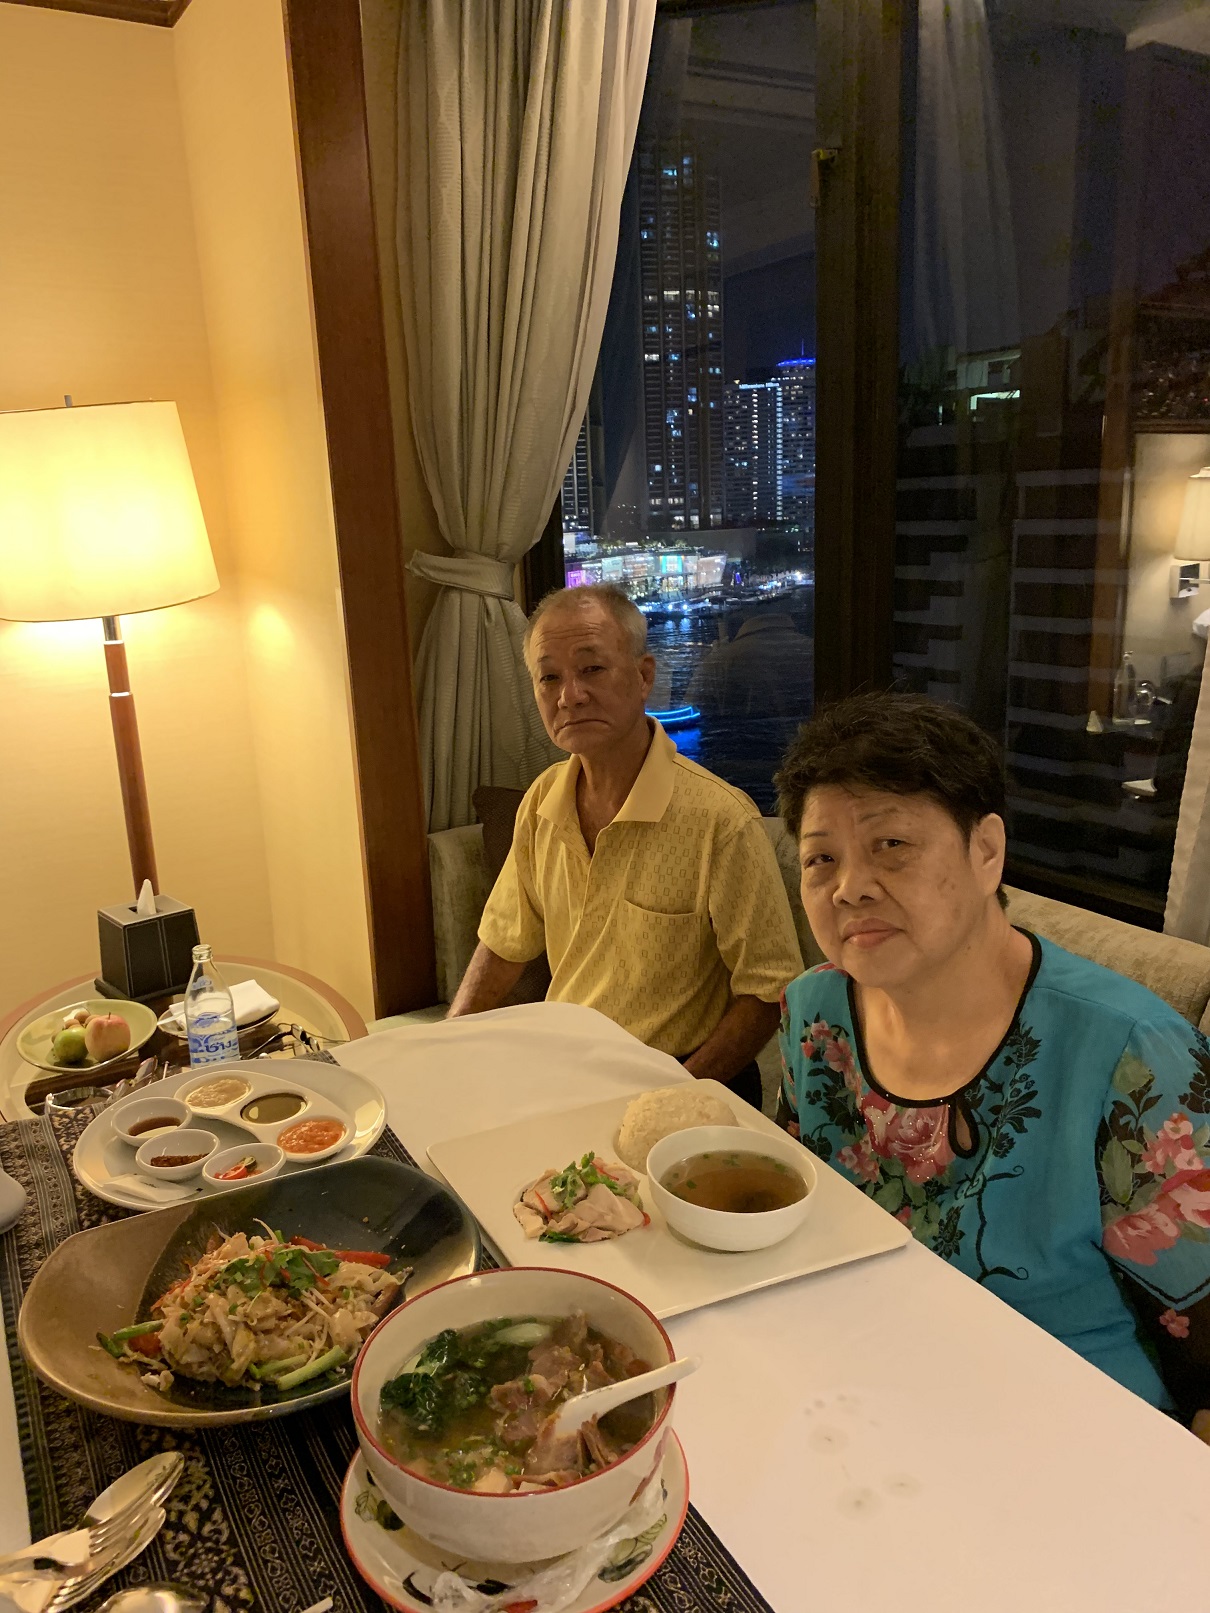 In room dinner with mum and dad!